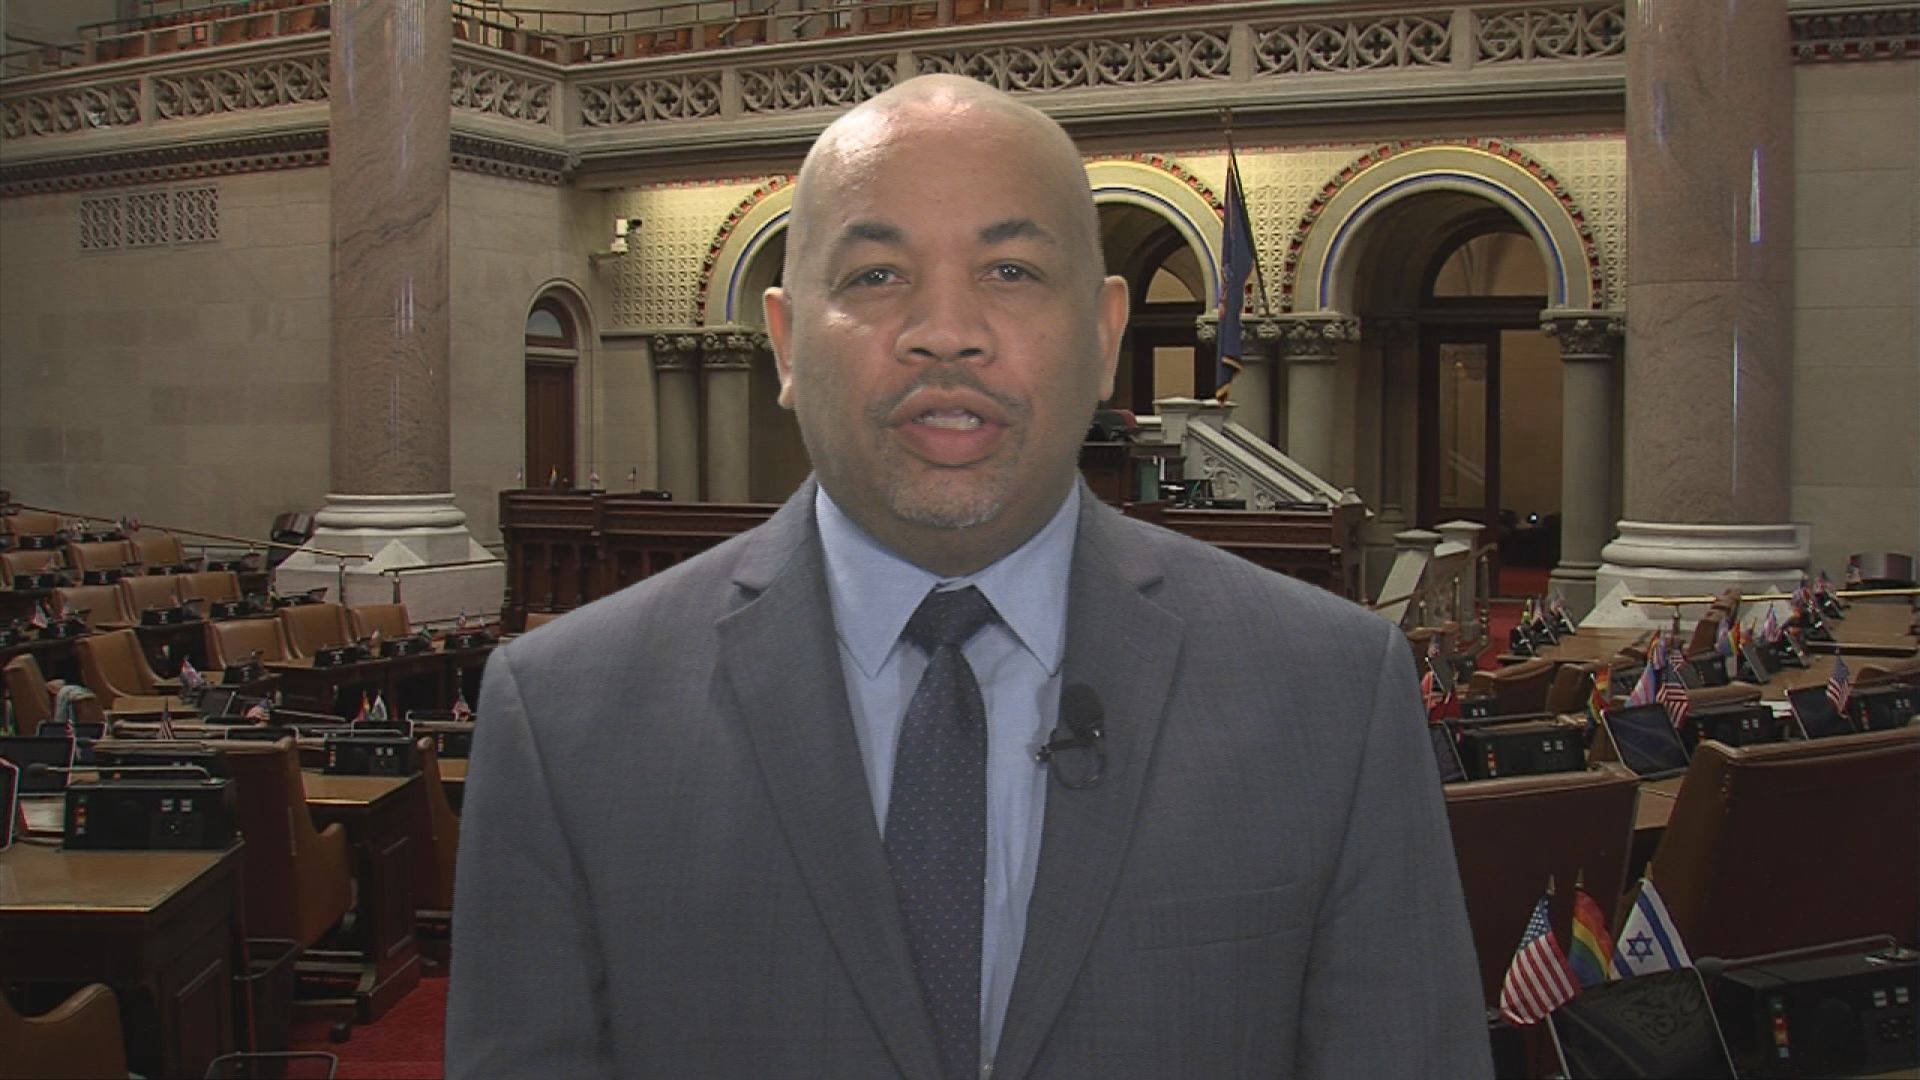 Speaker Carl Heastie thanks MTA workers for their continued work thought the COVID-19 pandemic